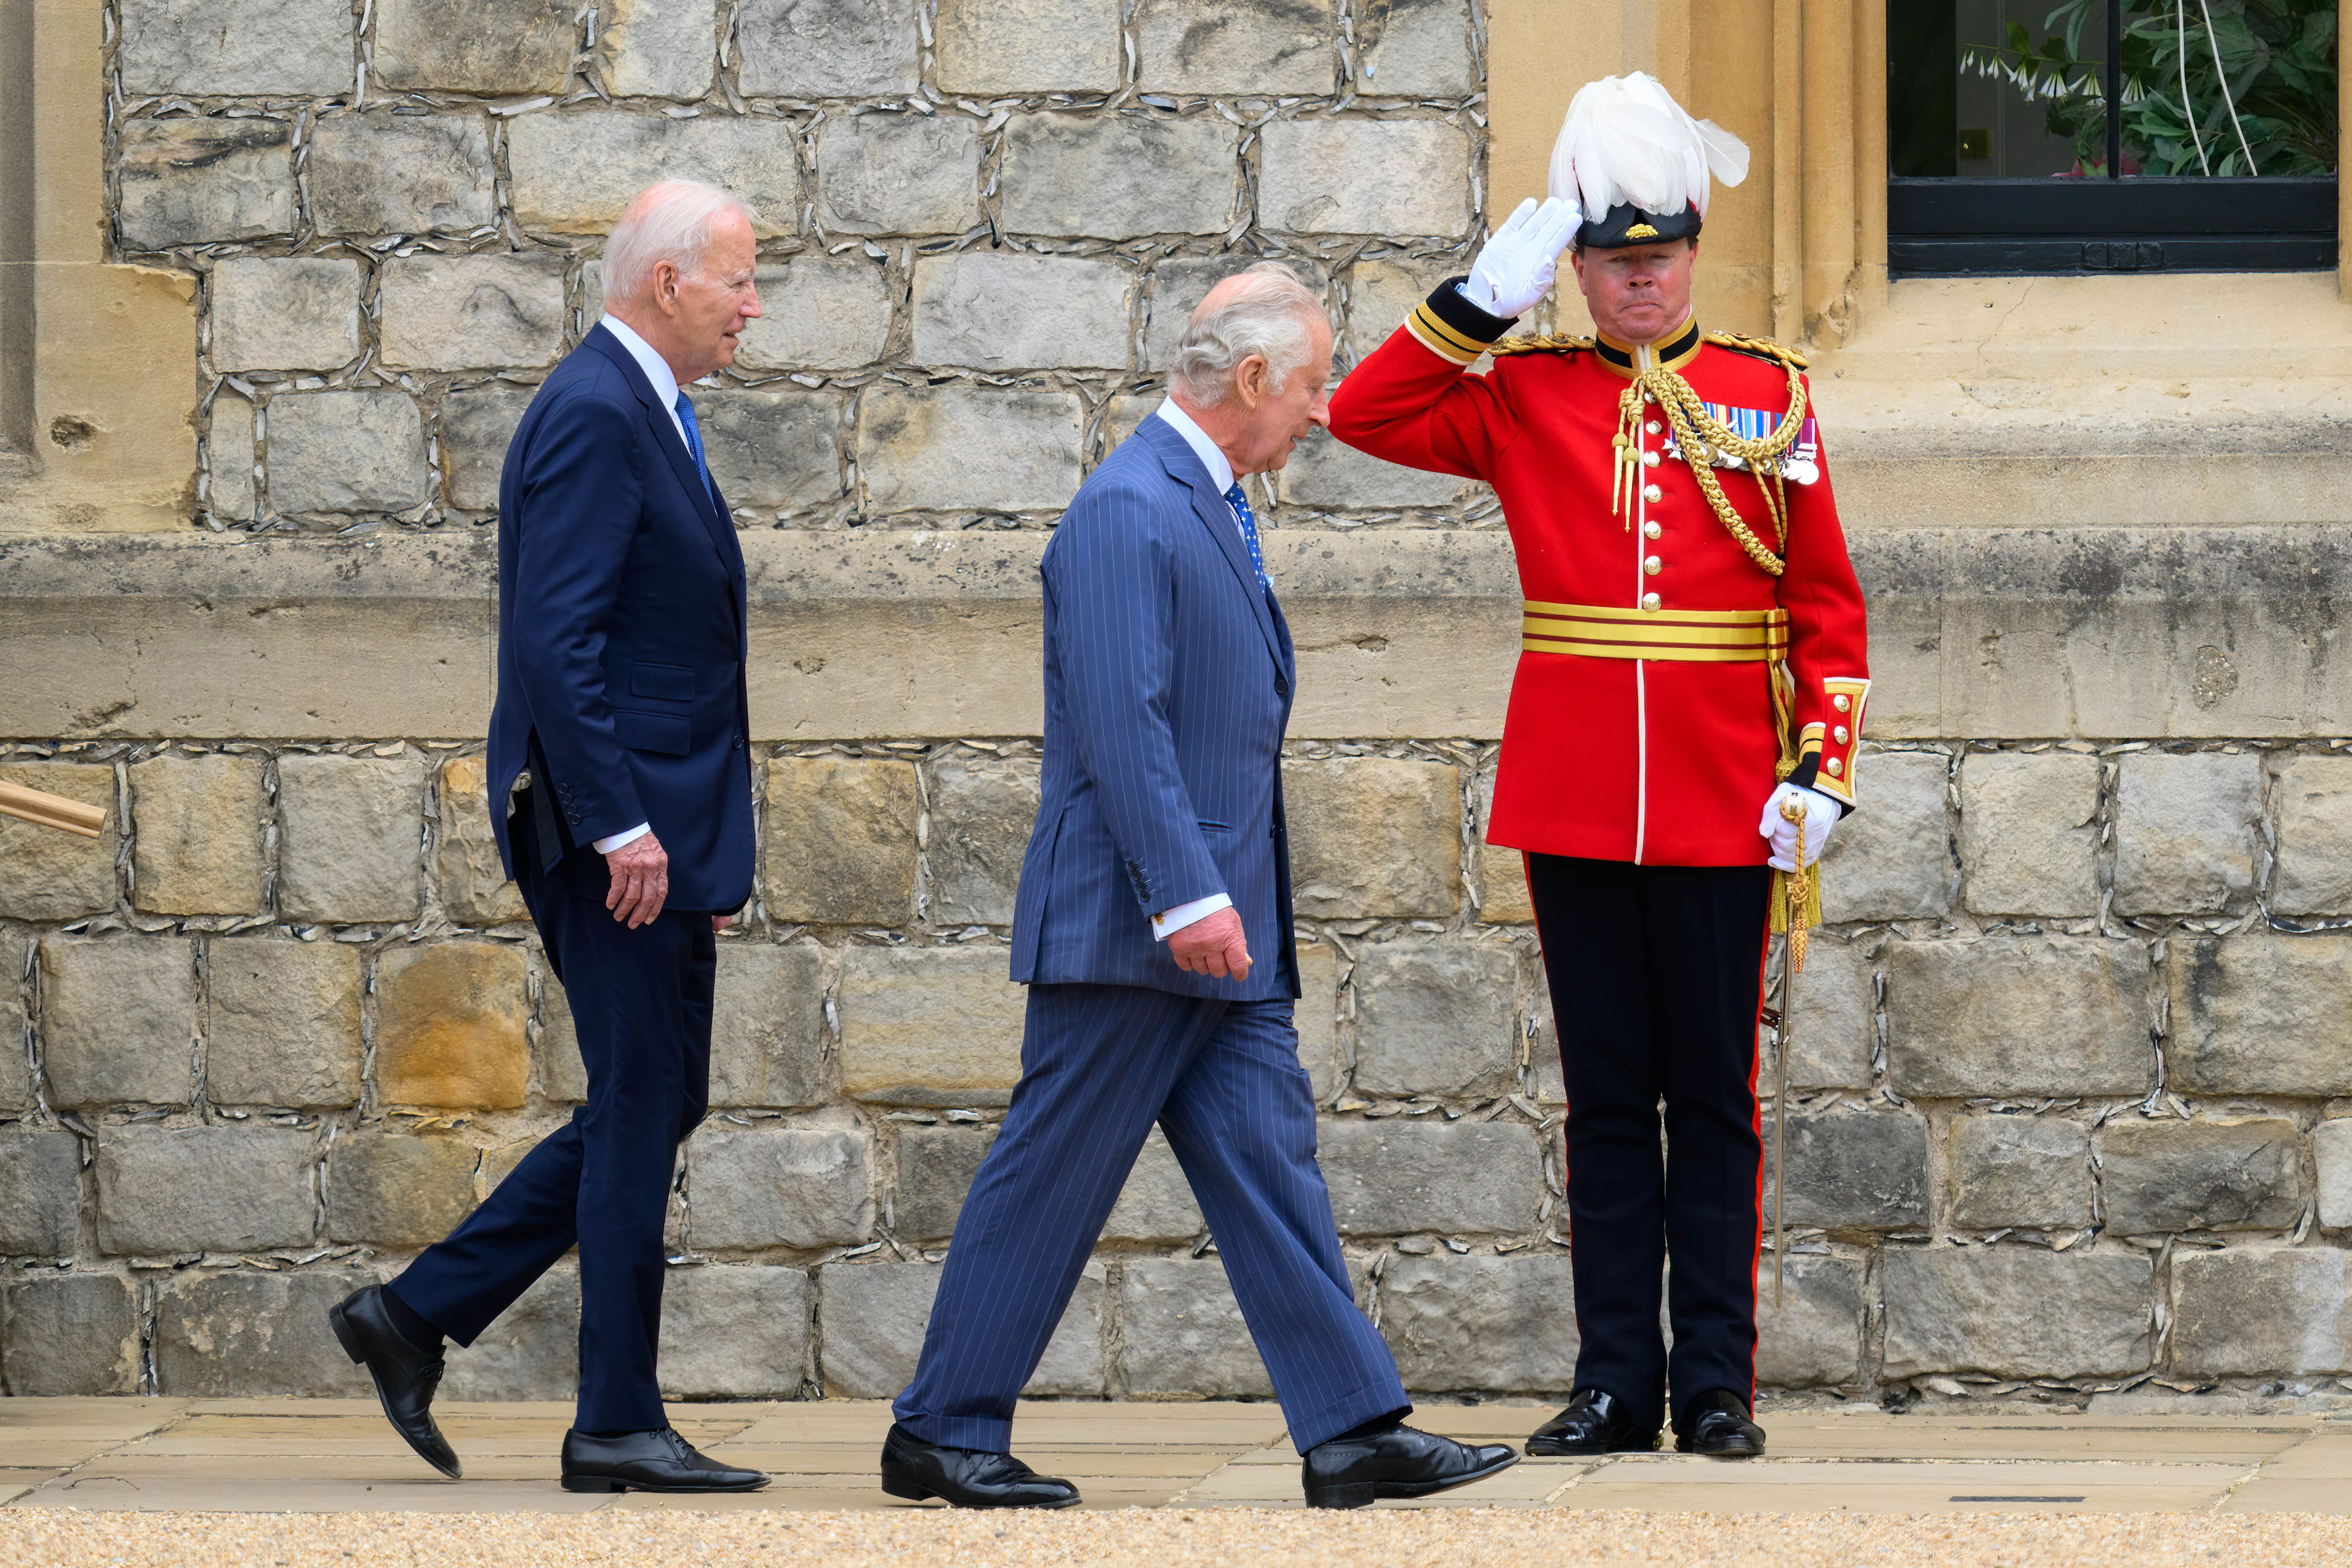 <p>President Joe Biden and King Charles III walked to the dais in the Quadrangle of Windsor Castle in Windsor, England, on July 10, 2023. Upon the president's arrival, a Guard of Honour formed of the Prince of Wales's Company of the Welsh Guards gave a royal salute and the U.S. national anthem was played by the Band of the Welsh Guards. <a href="https://www.wonderwall.com/celebrity/royals/see-king-charles-iii-meetings-with-american-u-s-presidents-over-the-years-prince-charles-camilla-652116.gallery">The president visited Britain</a> to further strengthen the close relationship between the nations and to discuss climate issues with the monarch.</p>